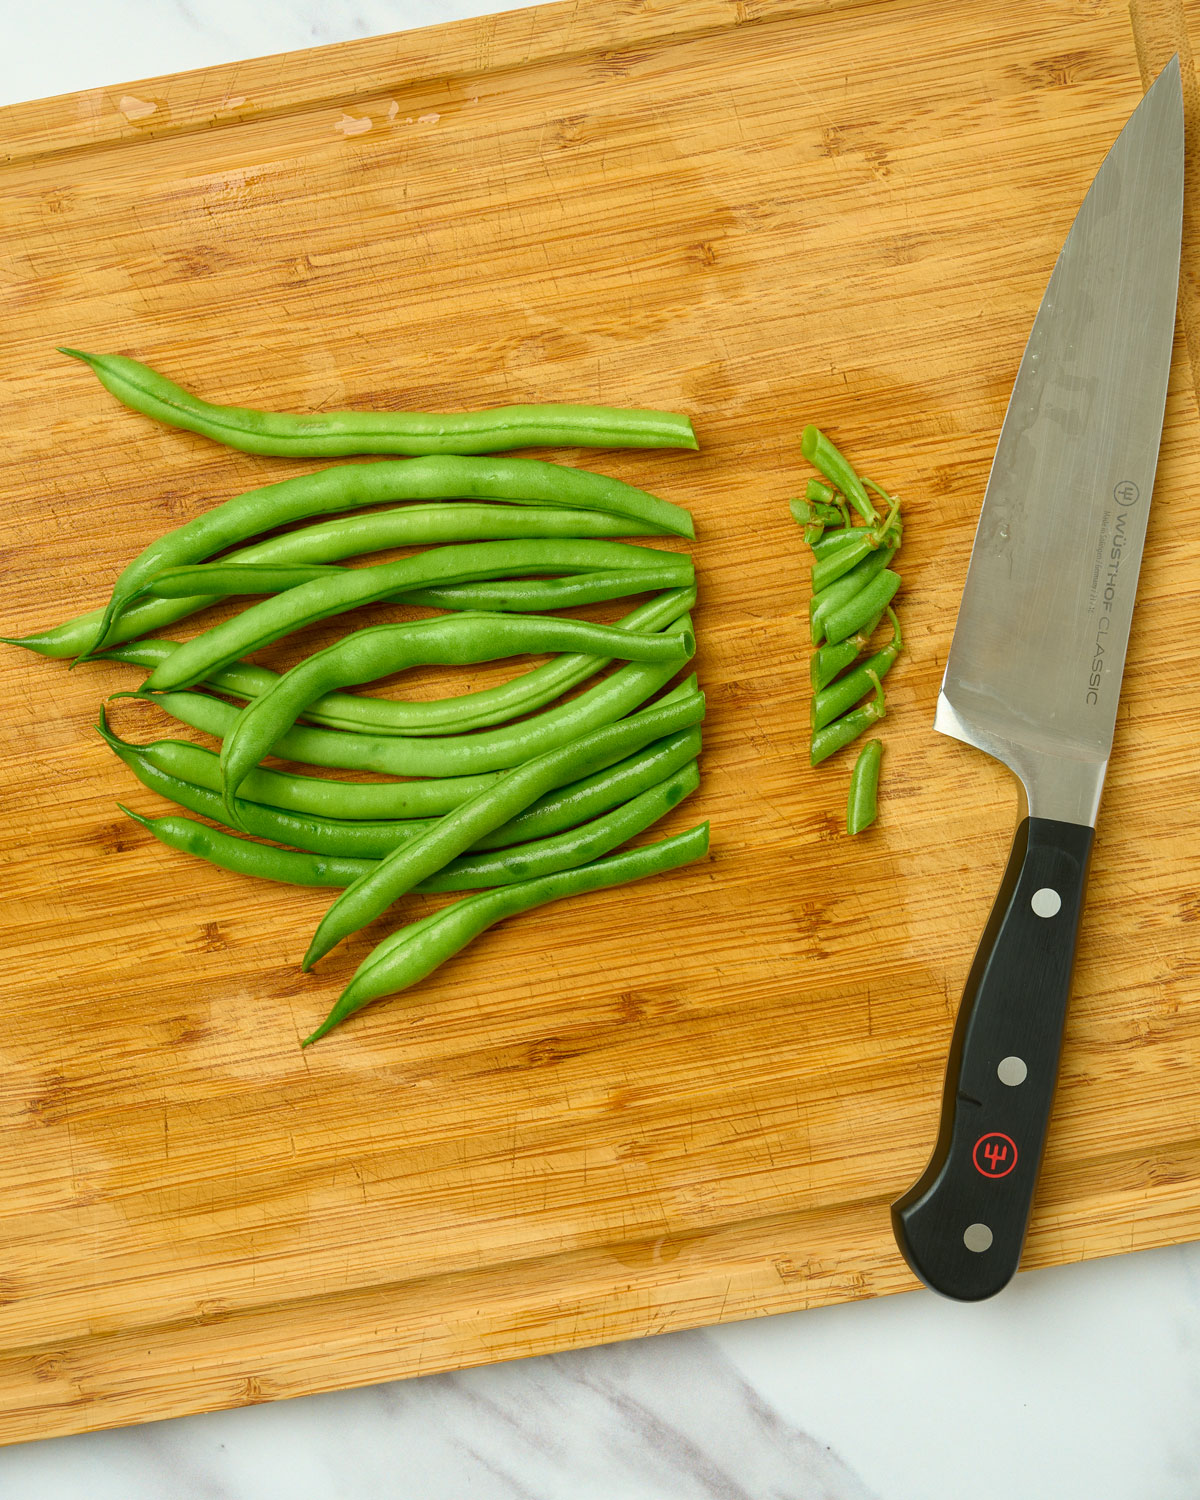 Green beans on a cutting board with stem ends trimmed off.